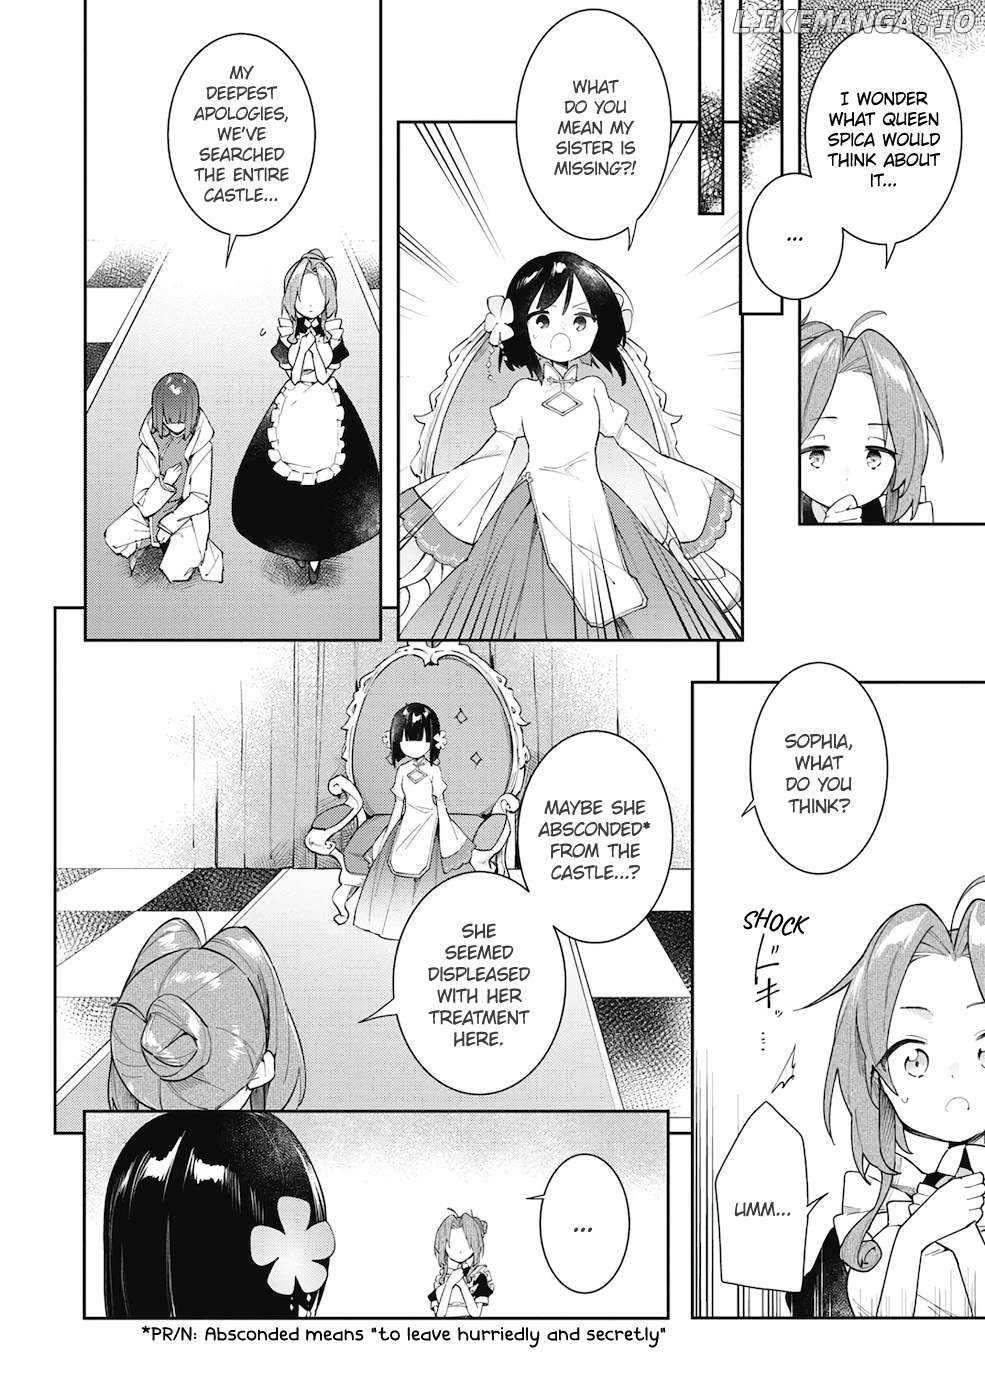 A Ruined Princess and Alternate World Hero Make a Great Country! Chapter 13 - page 7